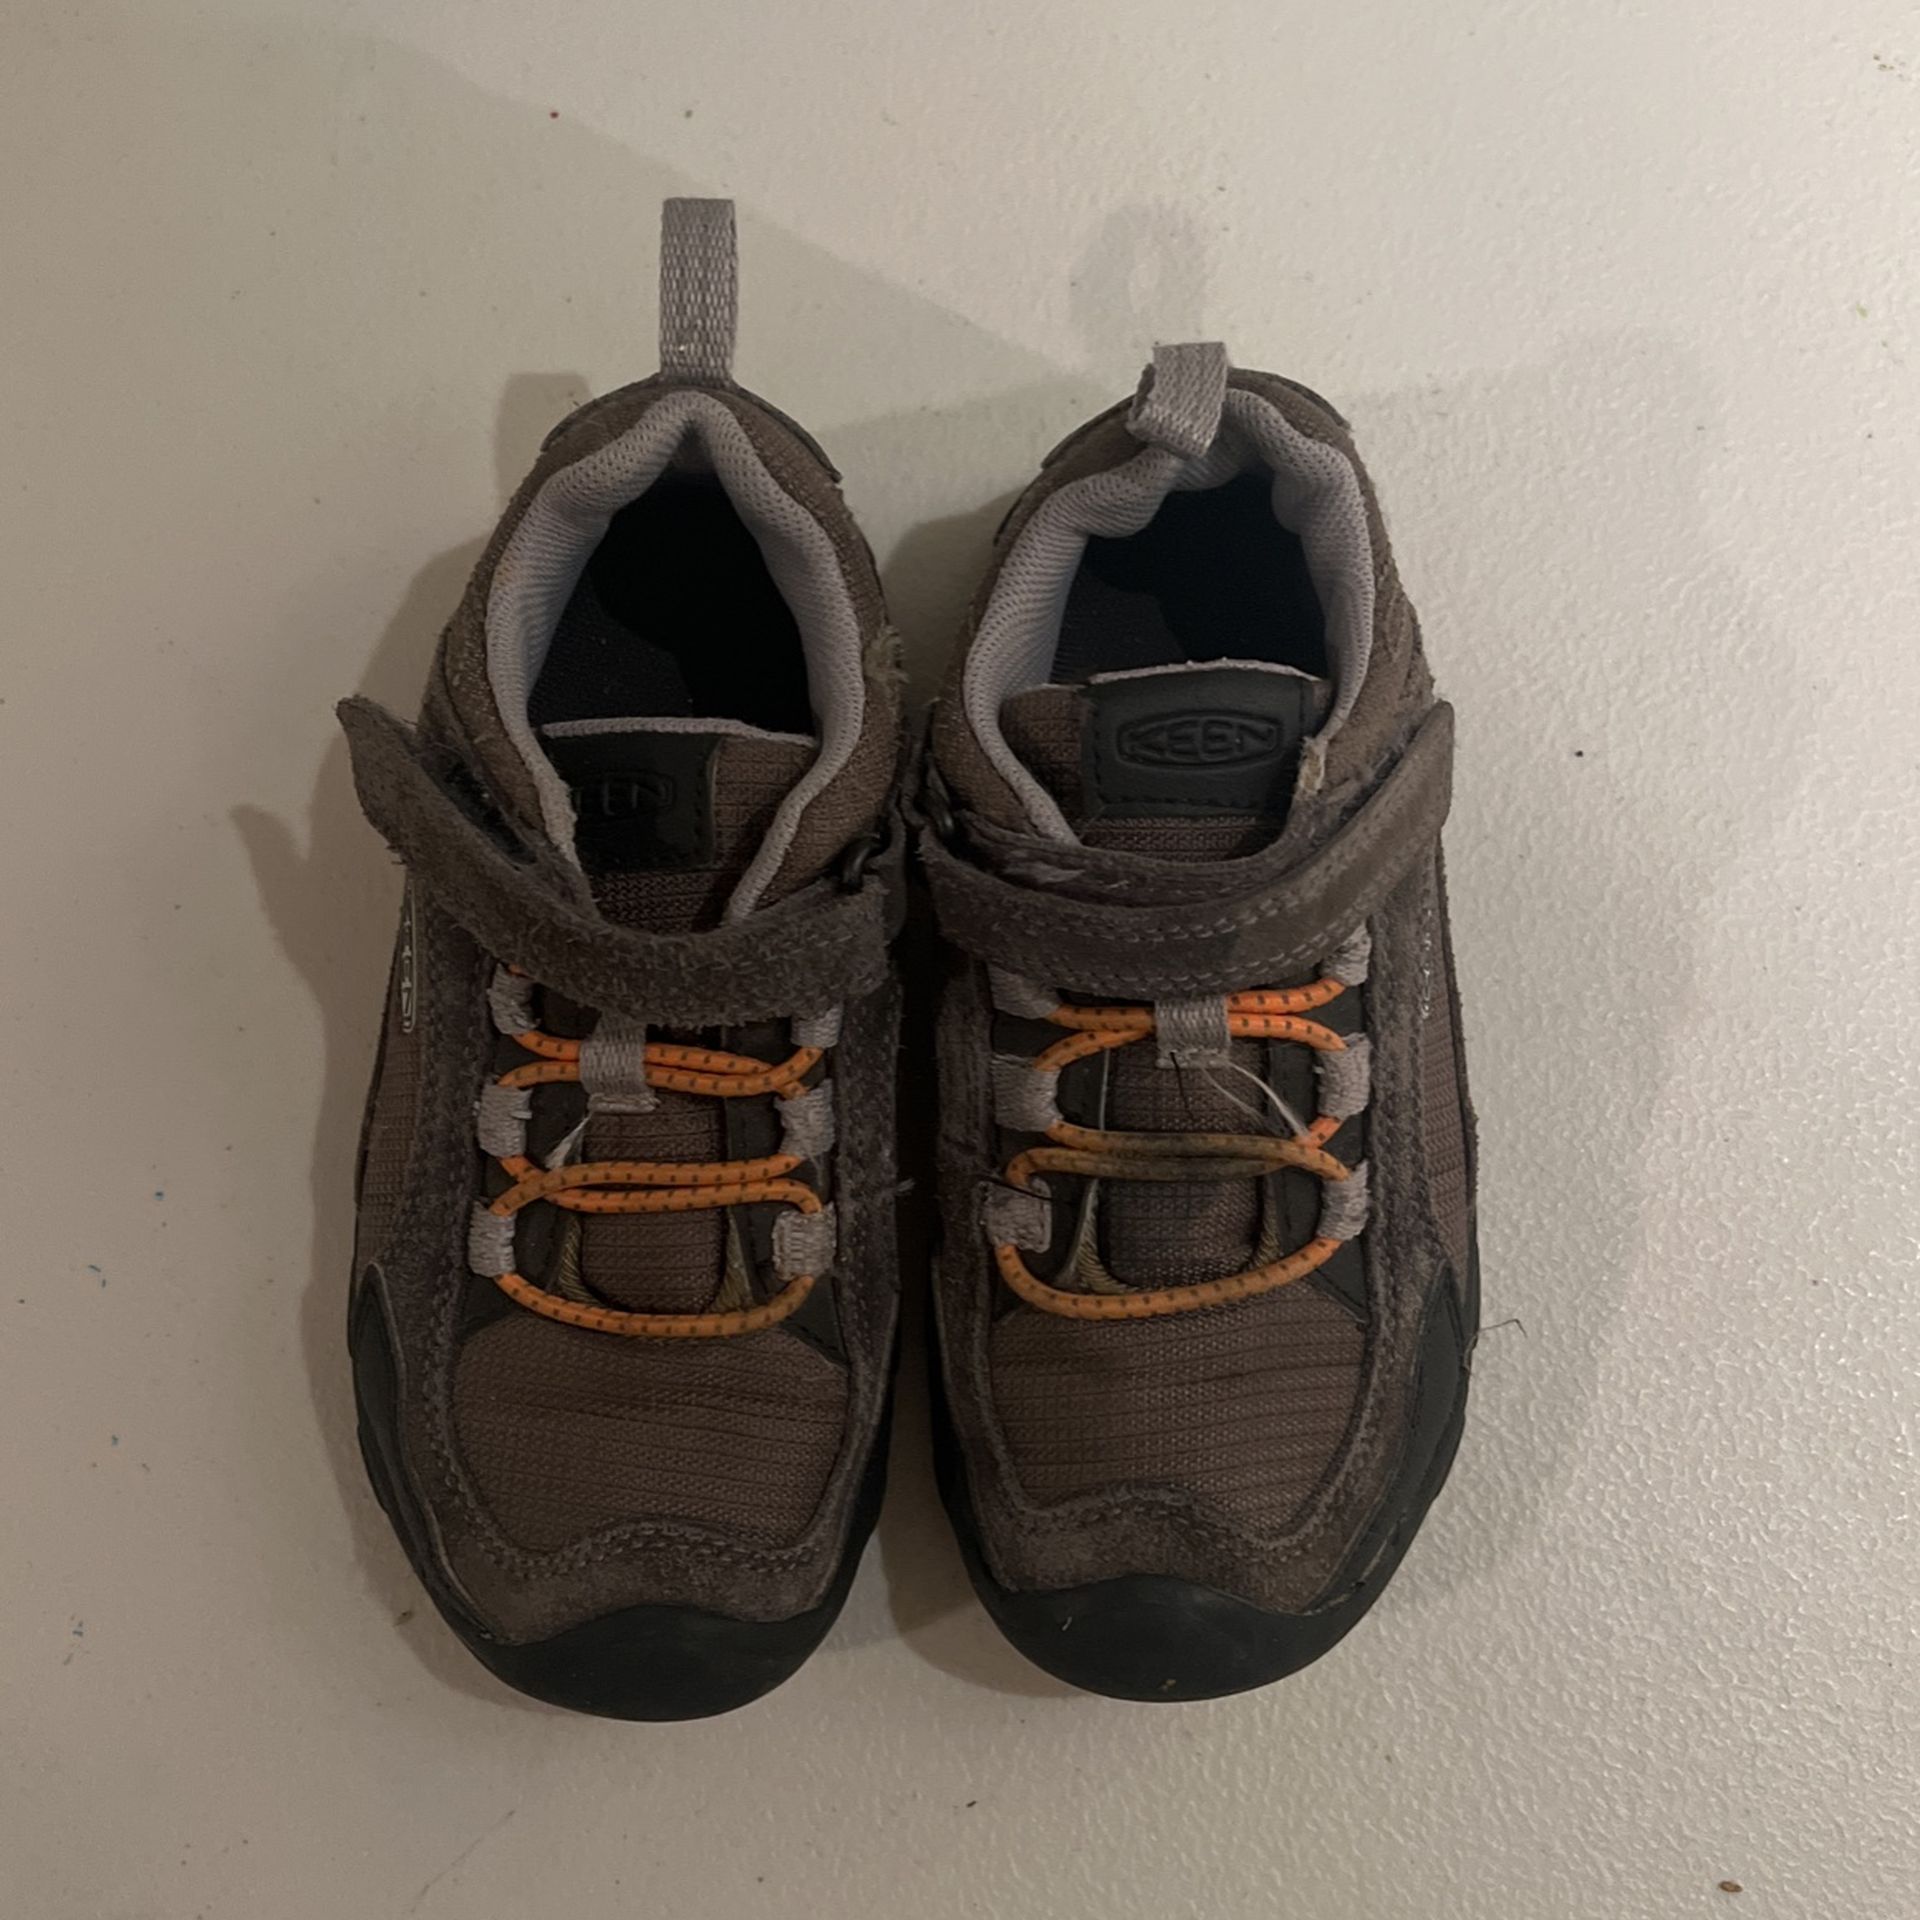 Keen Toddler Boys Shoes 